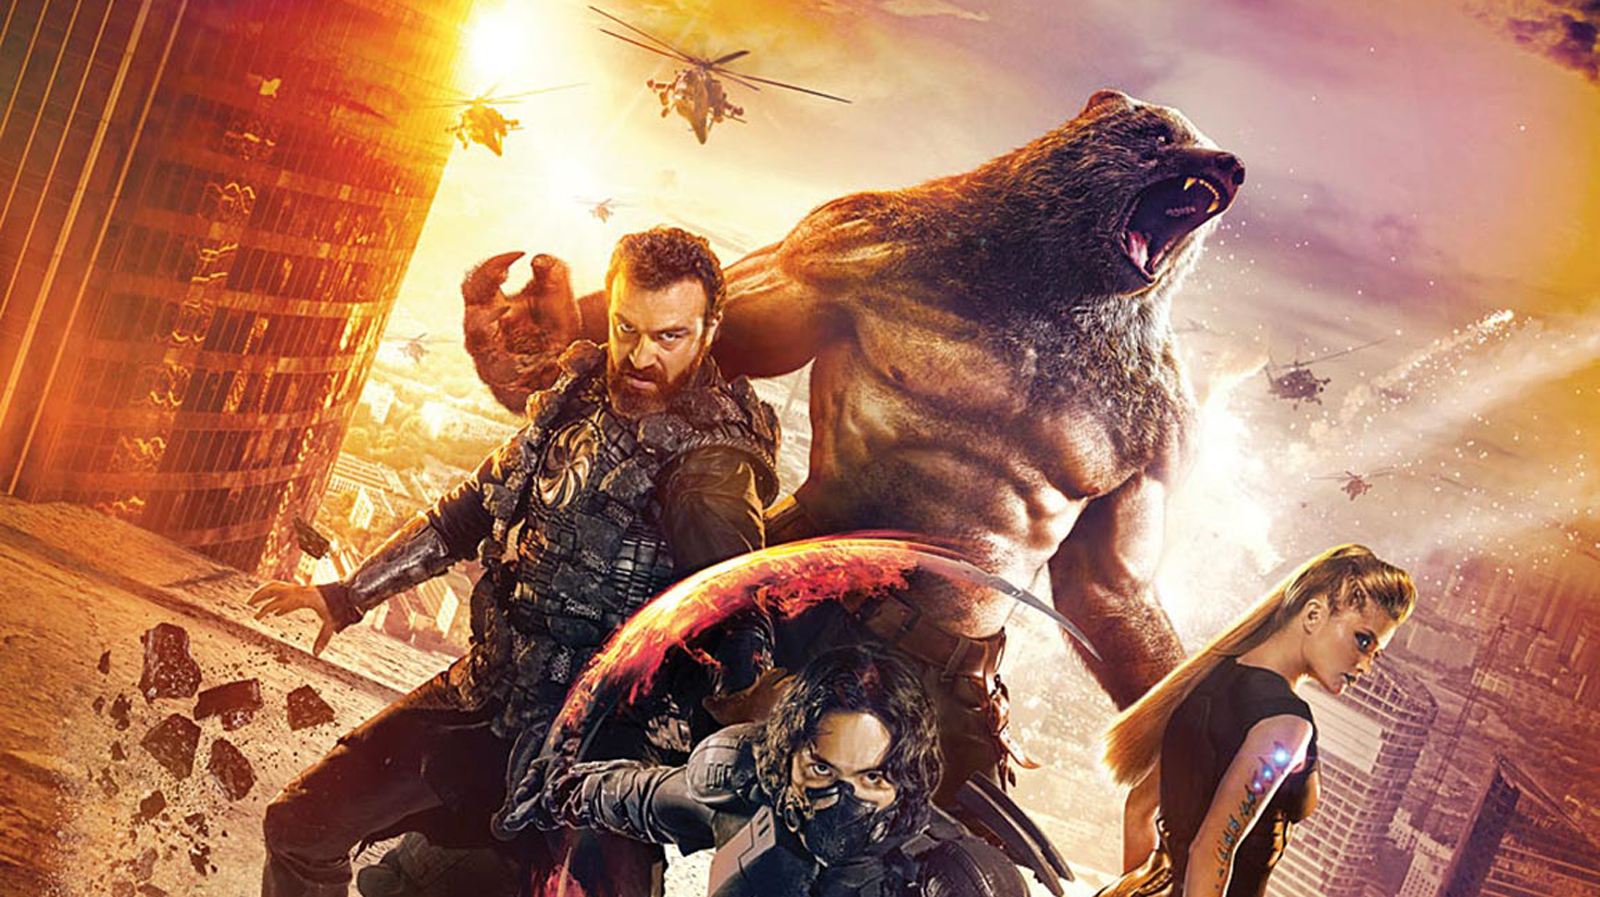 Full Trailer For Russian Superhero Film GUARDIANS Brings On The Were-Bear!